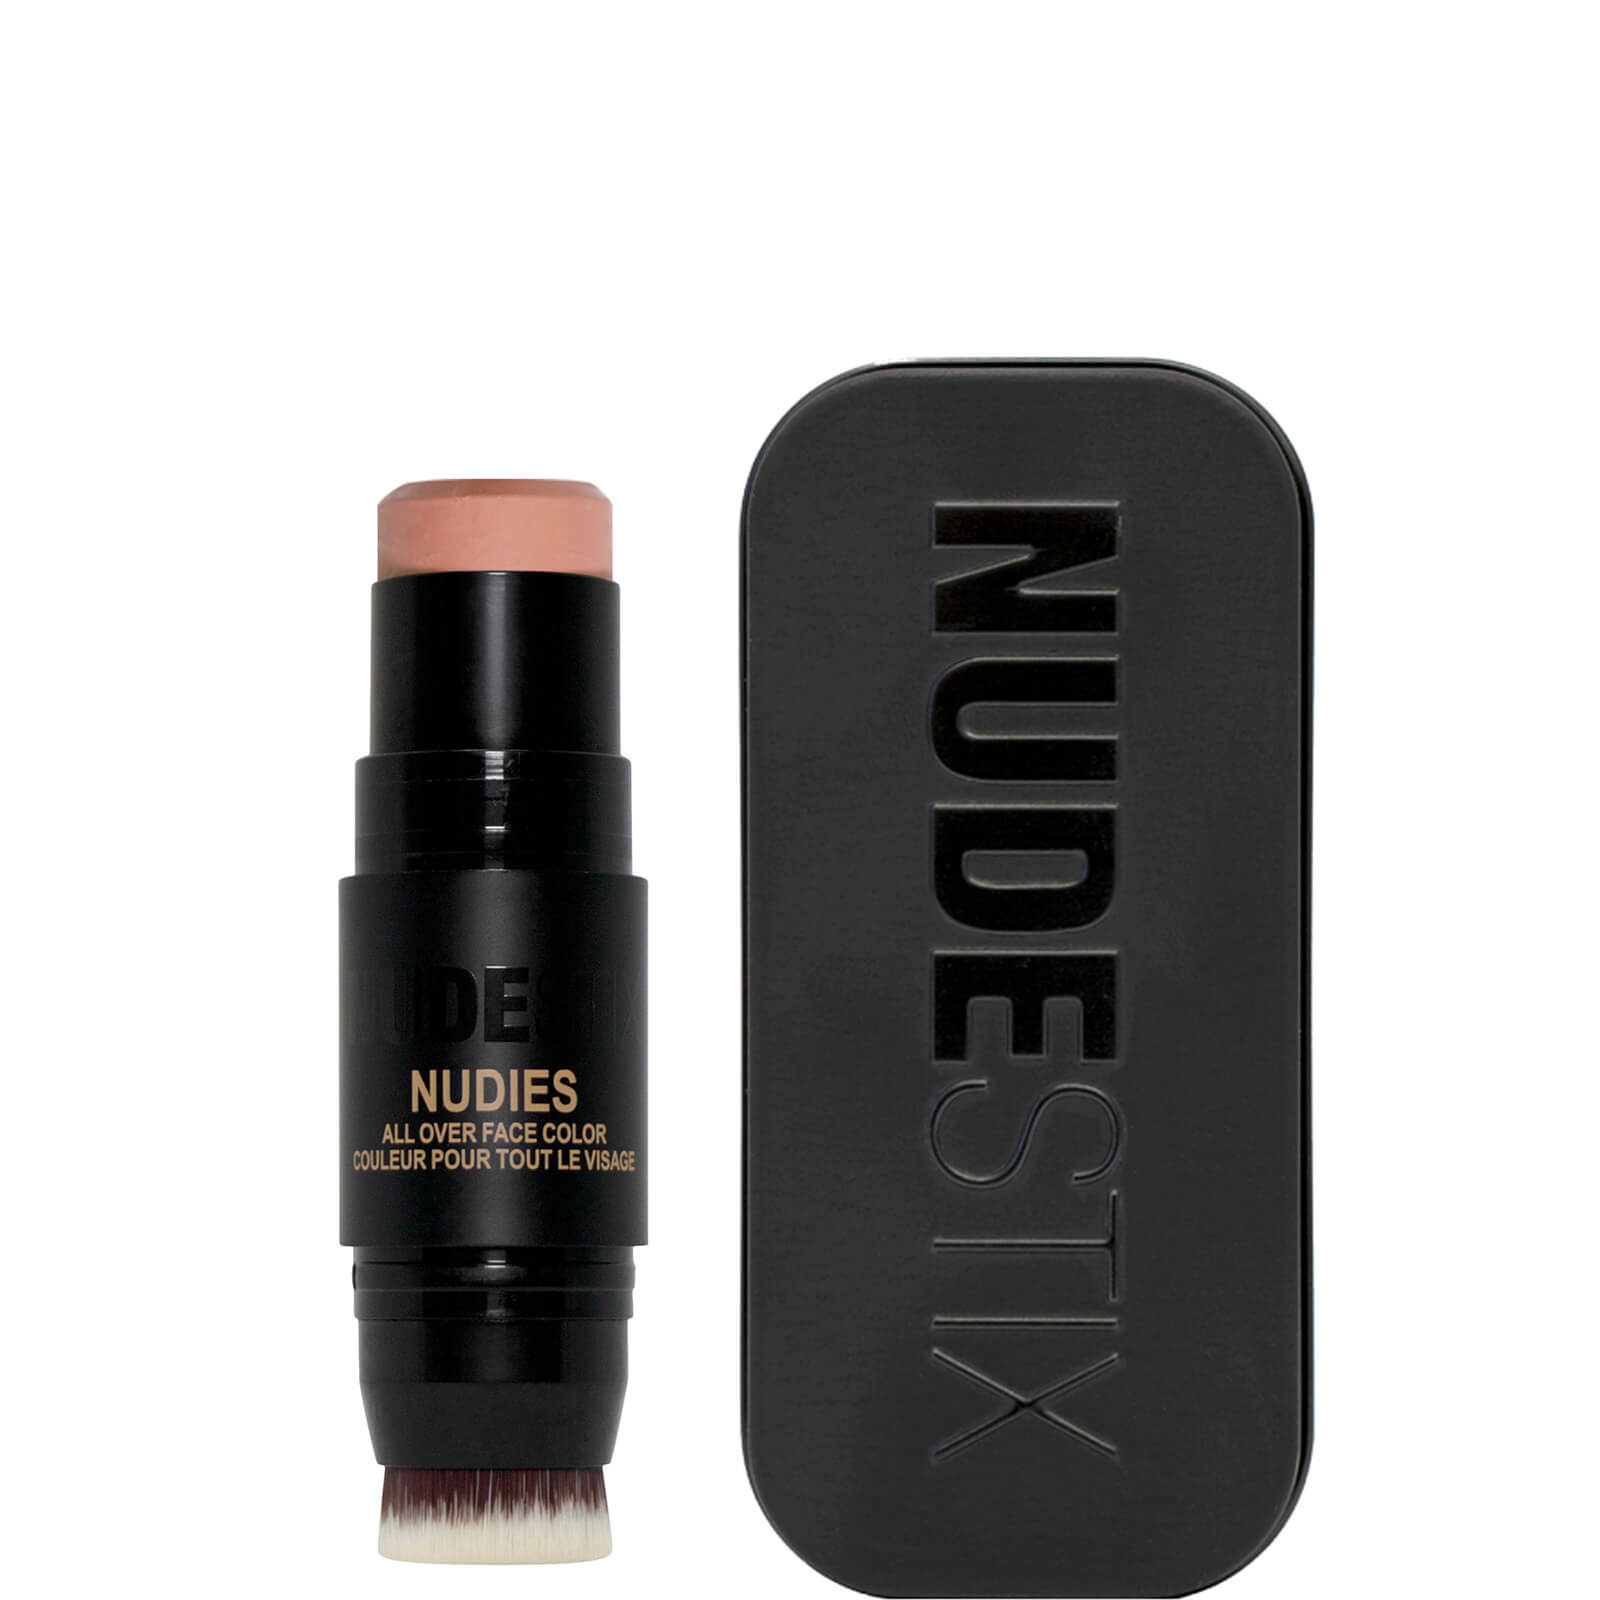 NUDESTIX Nudies Matte All Over Face Blush Colour 7g (Various Shades) - Bare Back